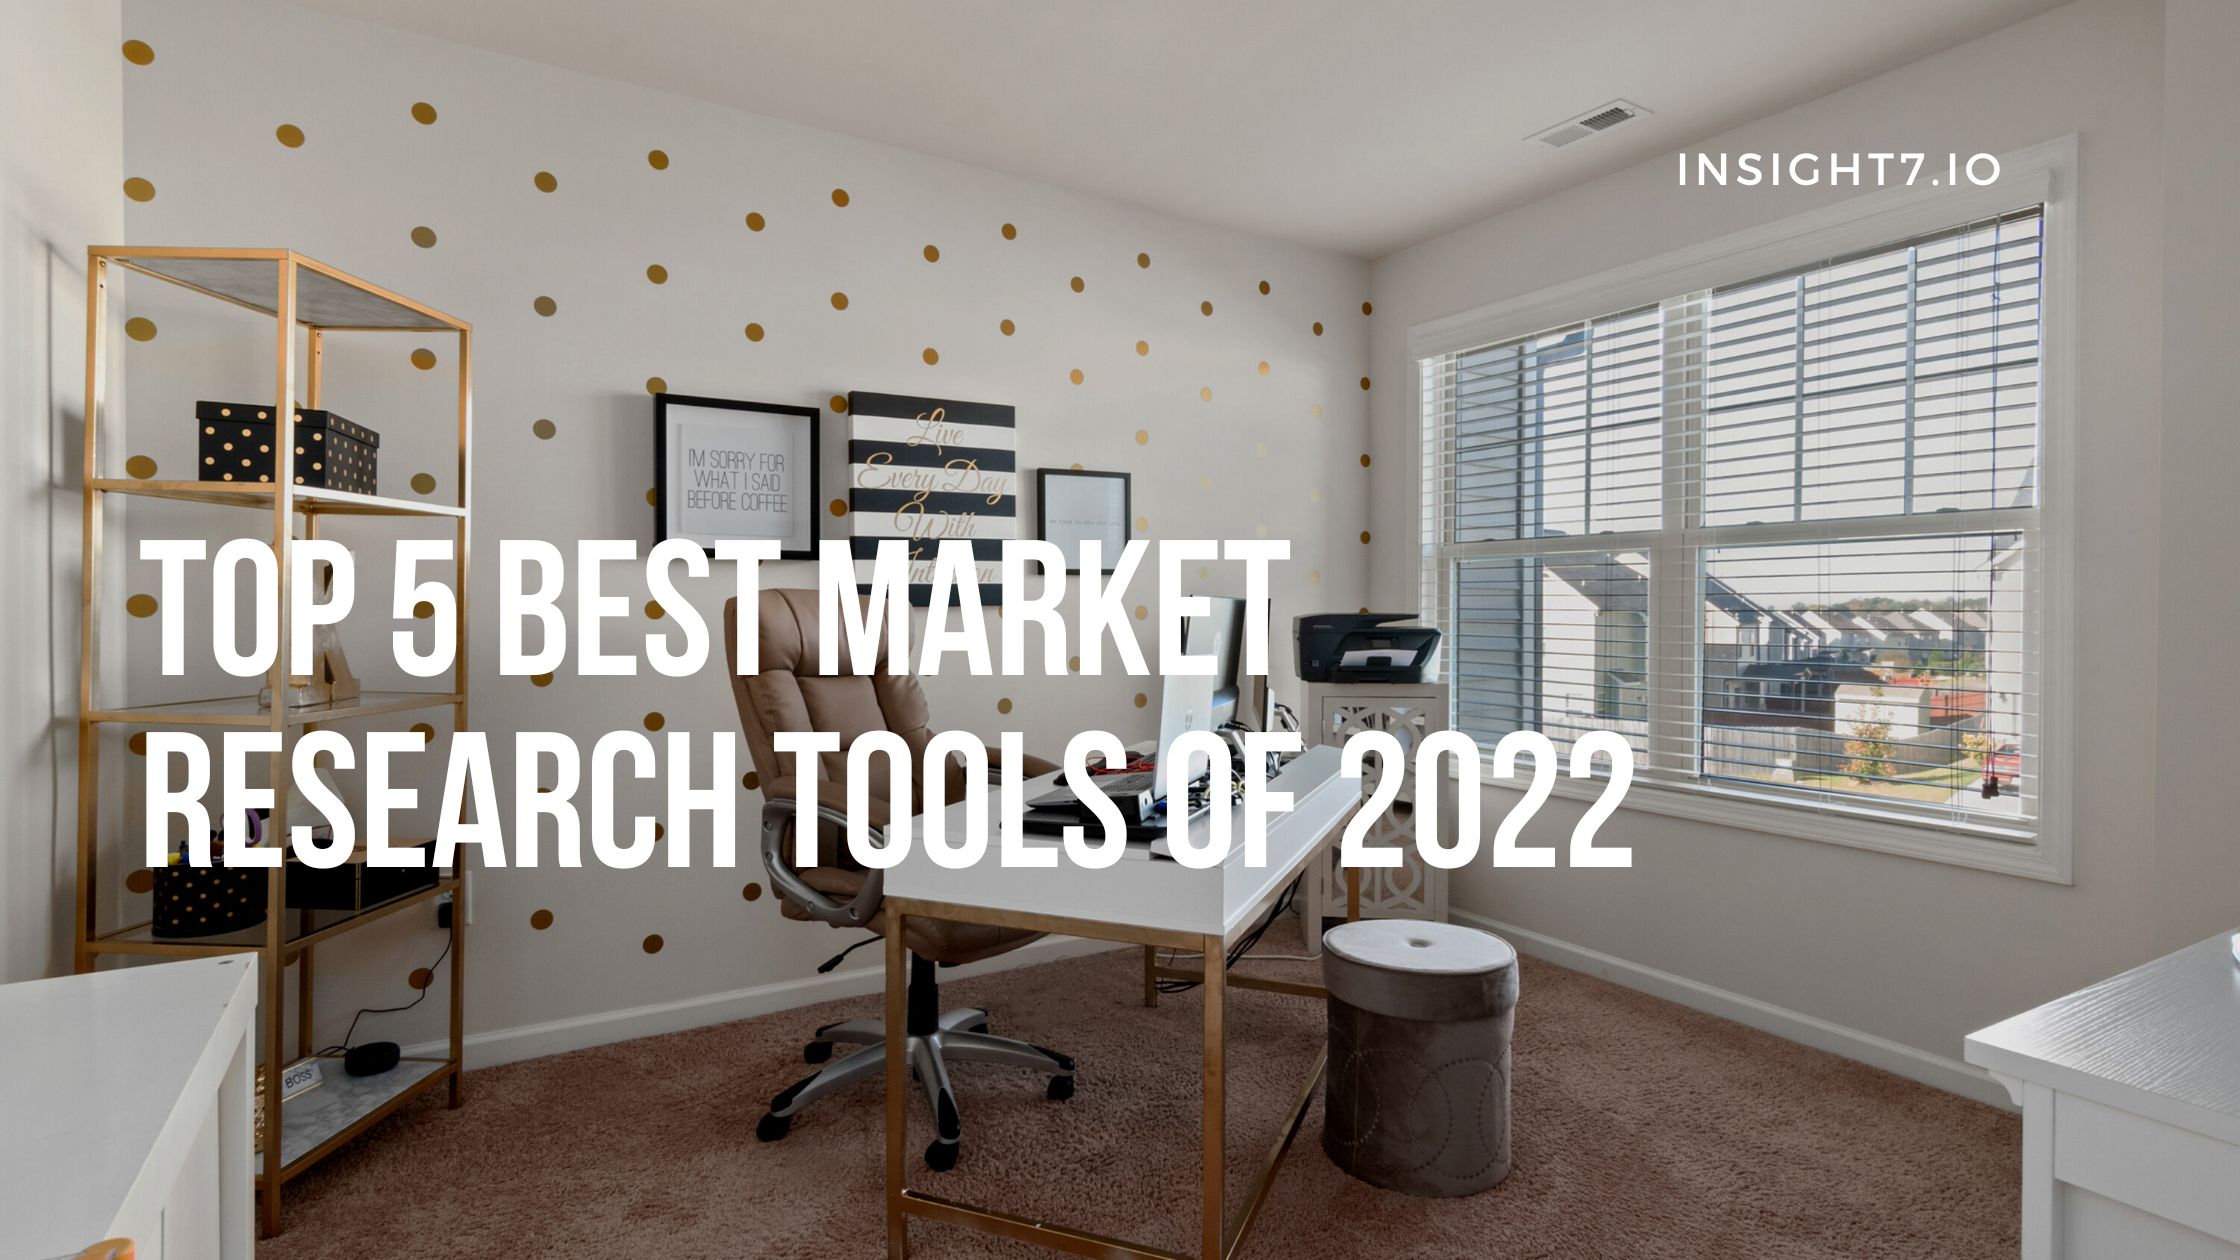 Top 5 Best Market Research Tools of 2022